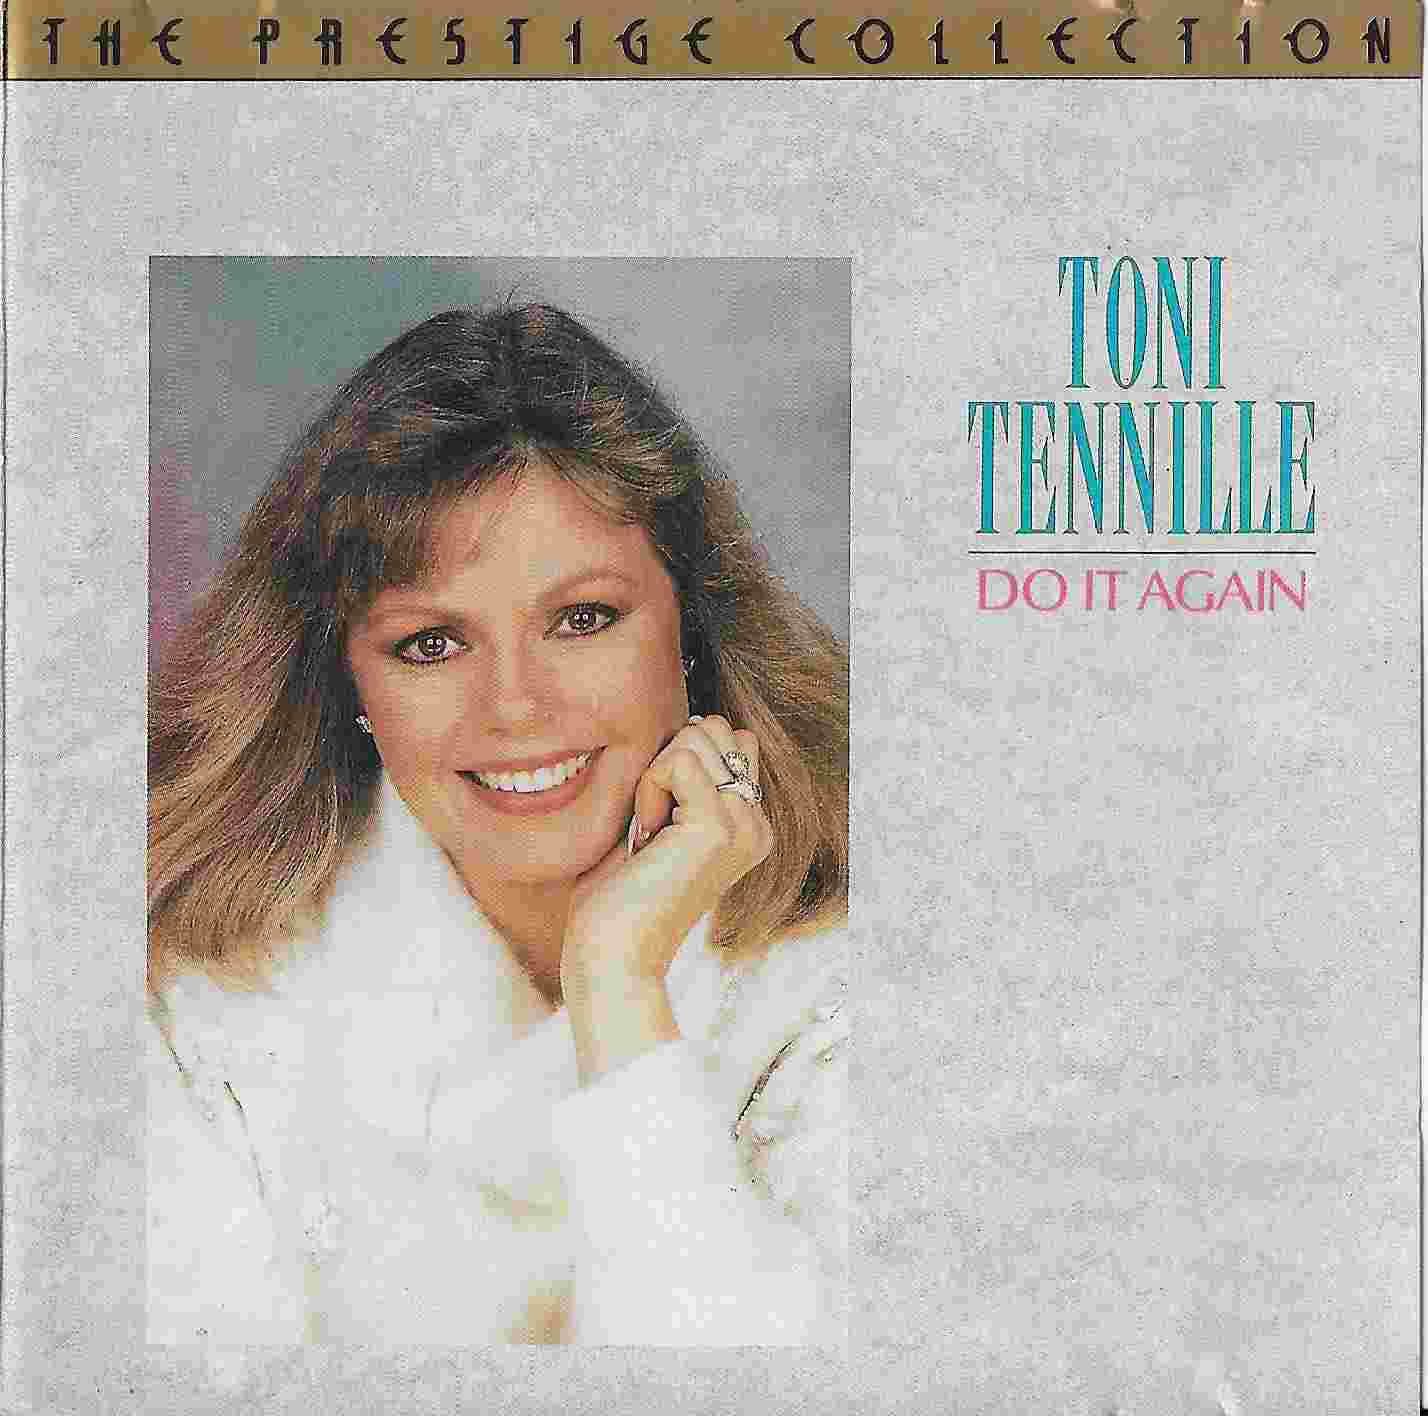 Picture of CDPC 5006 Do it again by artist Toni Tennille from the BBC cds - Records and Tapes library